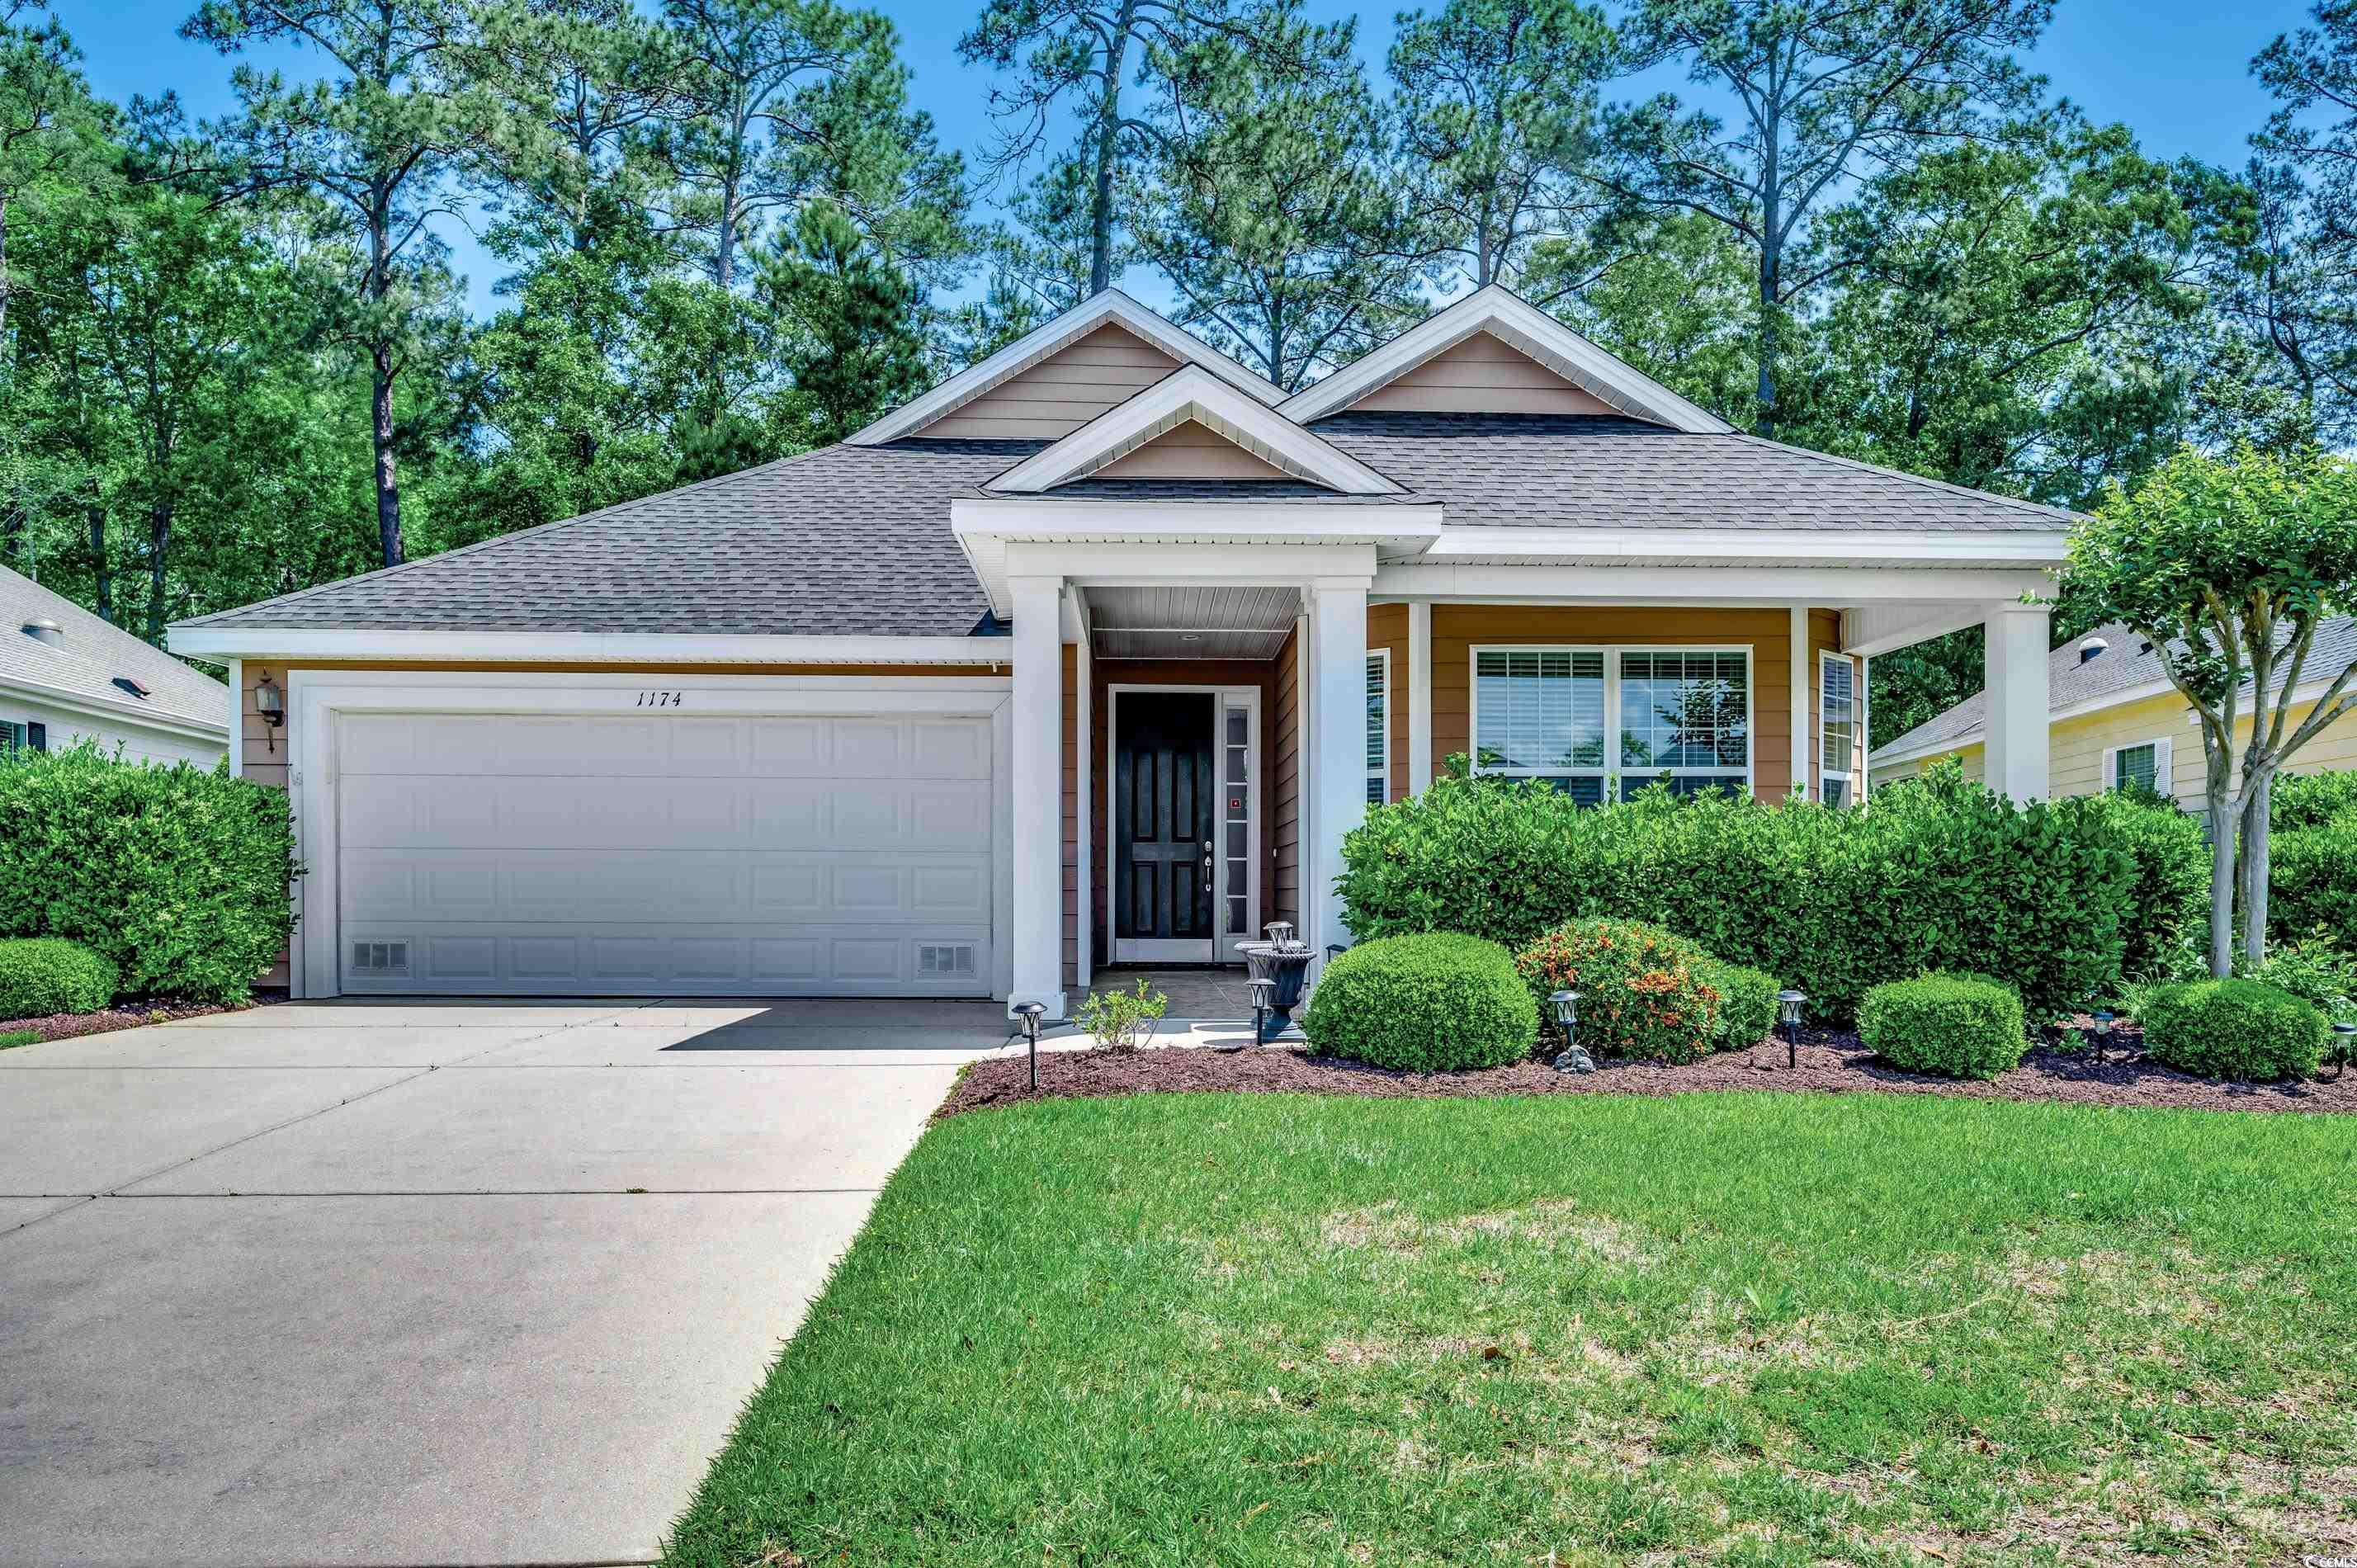 this beautifully maintained home is now available in the premier 55+ community of seasons in the popular prince creek area of murrells inlet. hoa includes all lawn care allowing you more time to enjoy the fabulous clubhouse, impressive fitness center ,indoor and outdoor pools, tennis, horseshoes, shuffleboard, bocce, pickle ball, outdoor fireplace and hot tub, outdoor kitchen, huge dining and party area and endless activities! schedule a tour of this home and amenity complex soon. homes go quickly in this gated neighborhood. this unique and very open design offers two seating areas or can be arranged as one large great room. vaulted ceilings provide a feeling of spaciousness while the front guest room with bay window gives your guests a comfortable suite with bath nearby. this home features hardwoods from the foyer through kitchen and main living areas, ceiling fans, eat in kitchen and breakfast bar, a 9'x27' screened porch and a private backyard with patio for grilling adding value to this popular plan! if you are a nature lover, this is perfect for bird watching and a natural setting.  the 3rd bedroom is set up as a tv room, a large owners suite features double closets and a bath with double sinks, vanity, linen storage and handicapped accessible shower. schedule your showing soon to find out why this is such a popular 55+ neighborhood in murrells inlet!